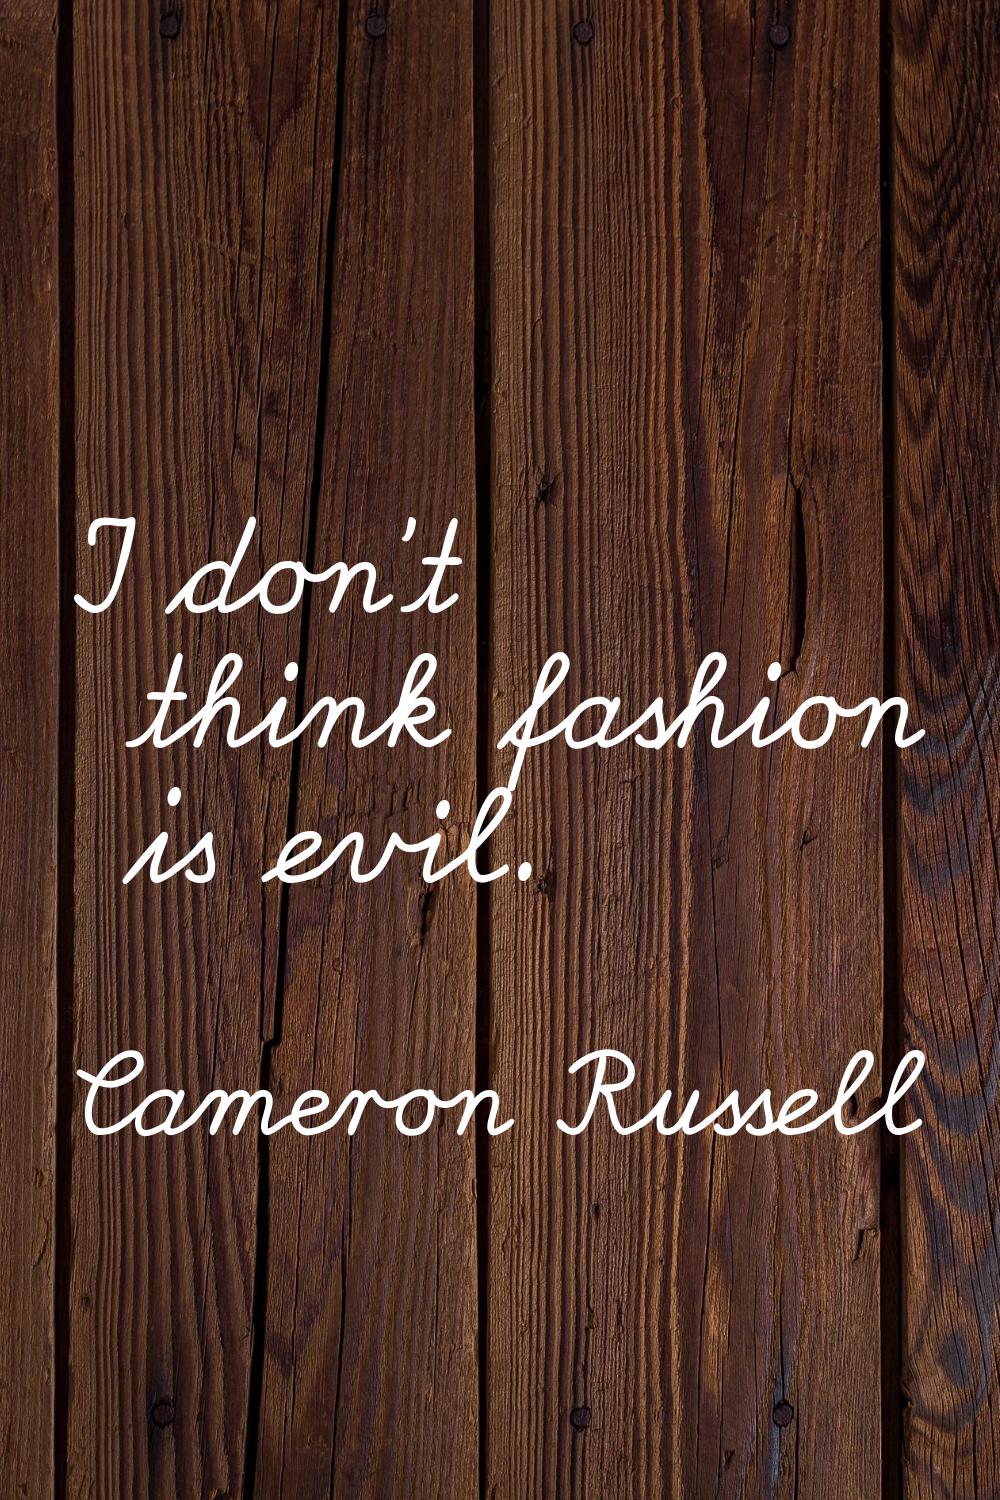 I don't think fashion is evil.